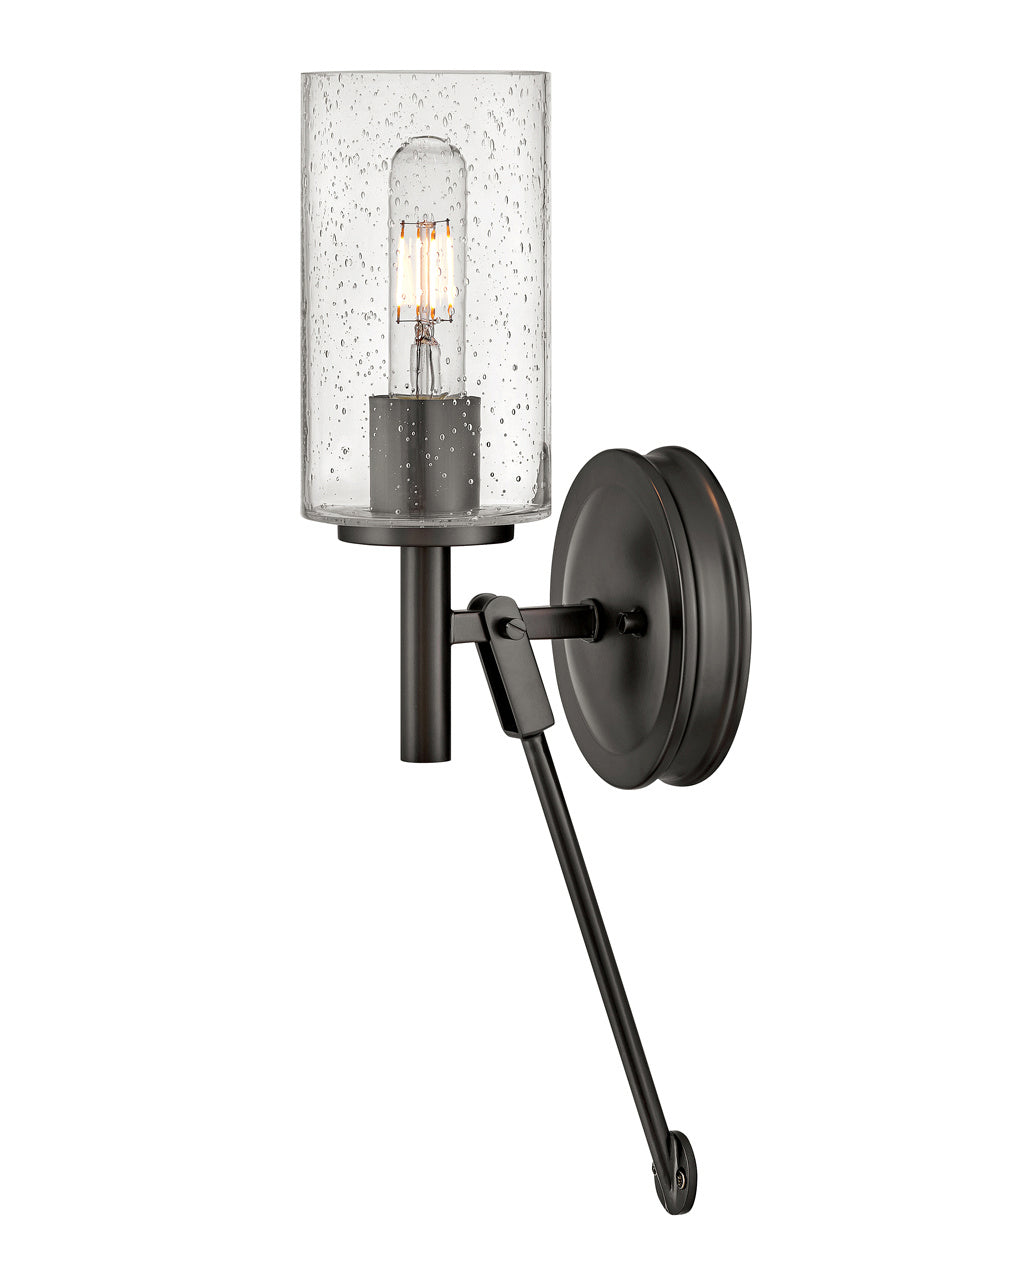 Hinkley - 3380BX - LED Wall Sconce - Collier - Black Oxide